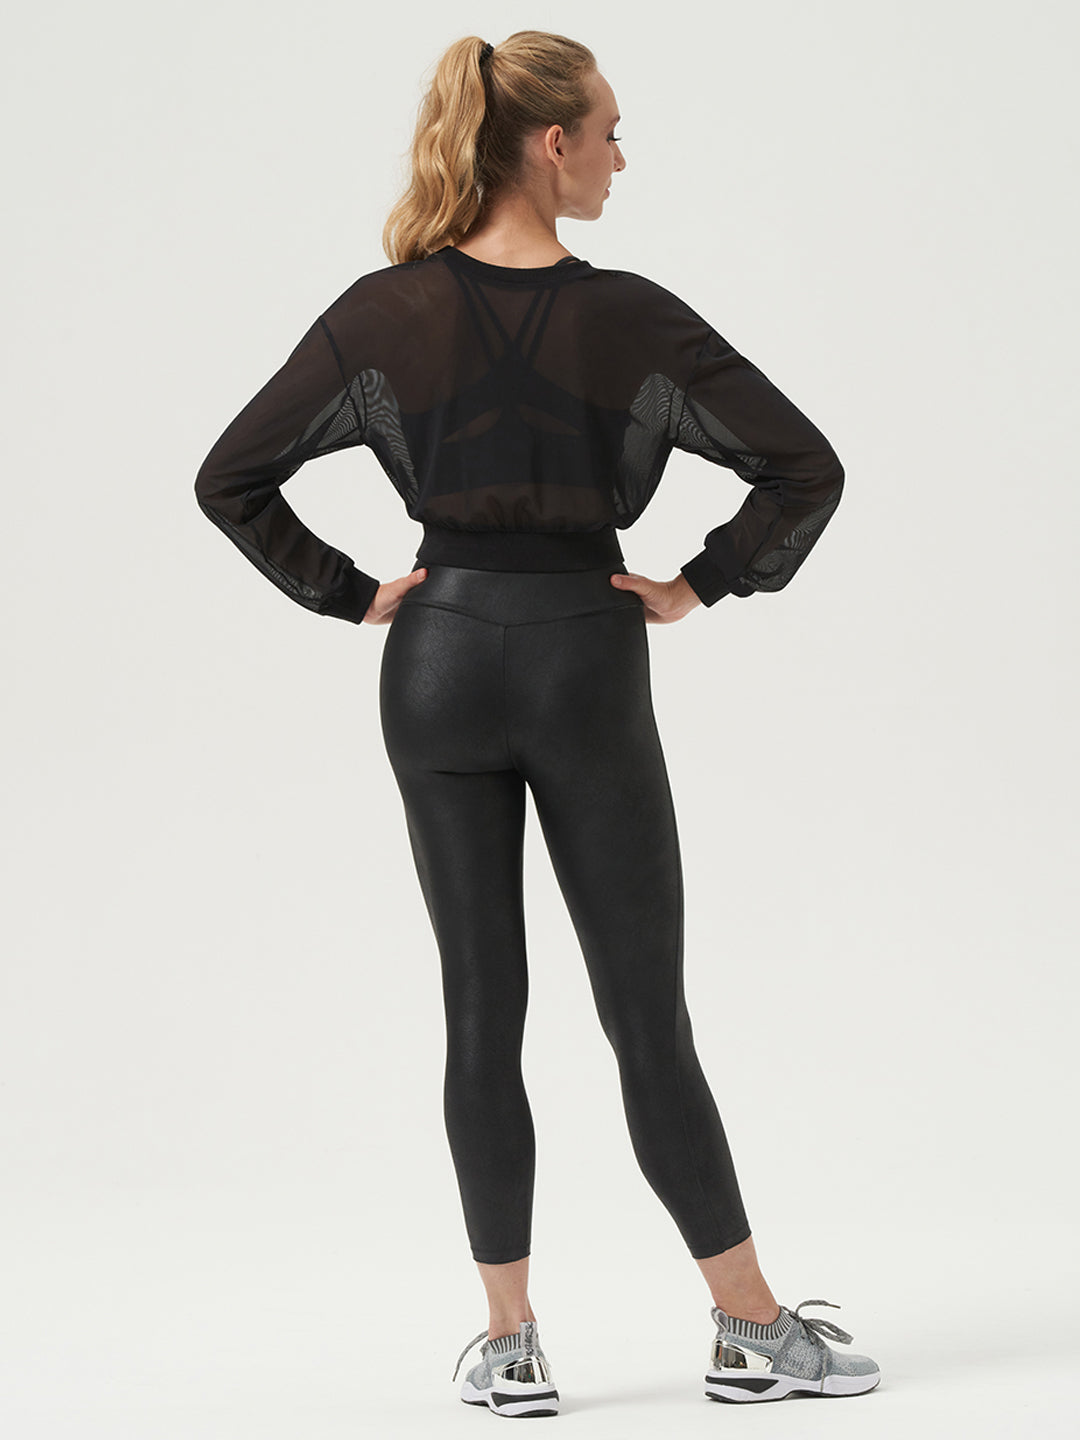 Remi Loose Fit Long Sleeve Top